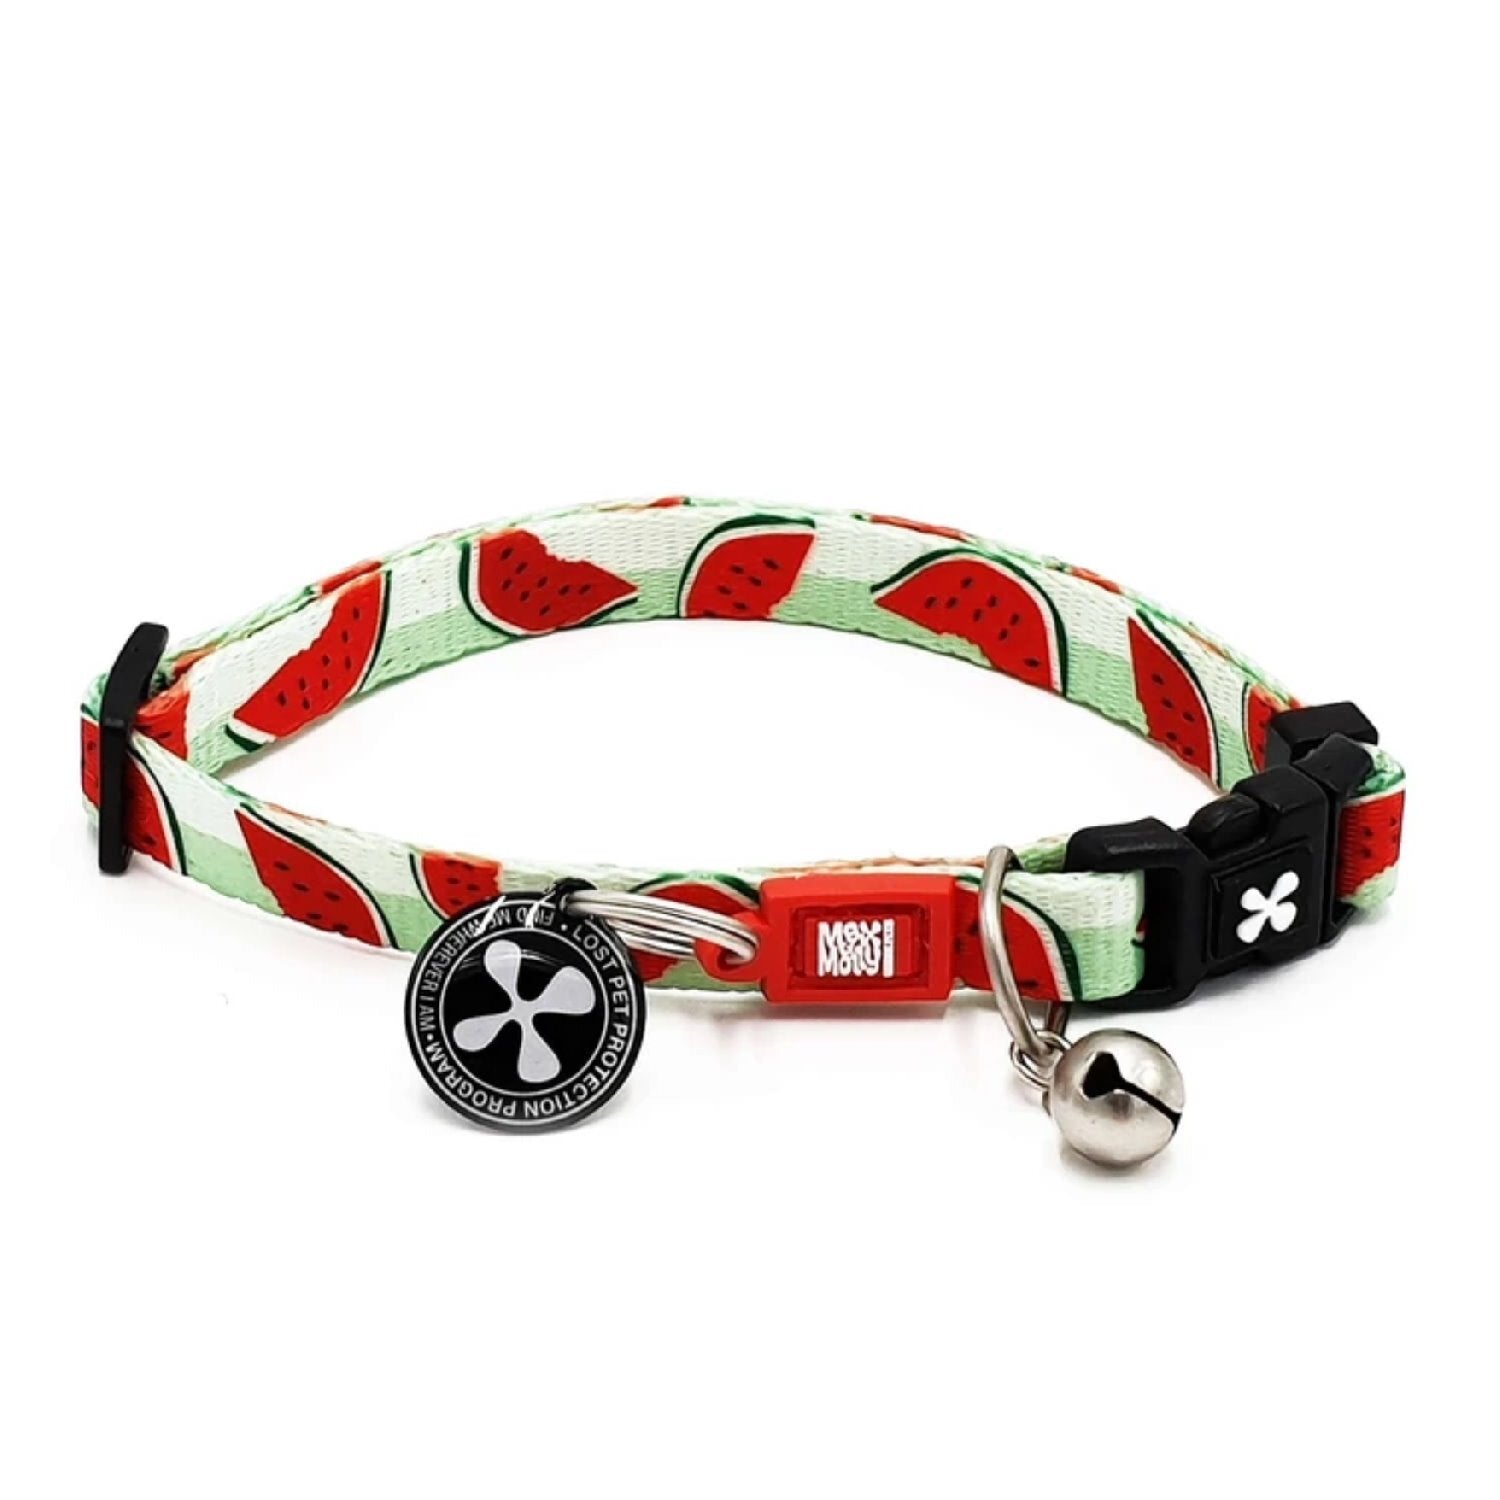 Max & Molly Smart ID Cat Collar - Watermelon - Pets and More